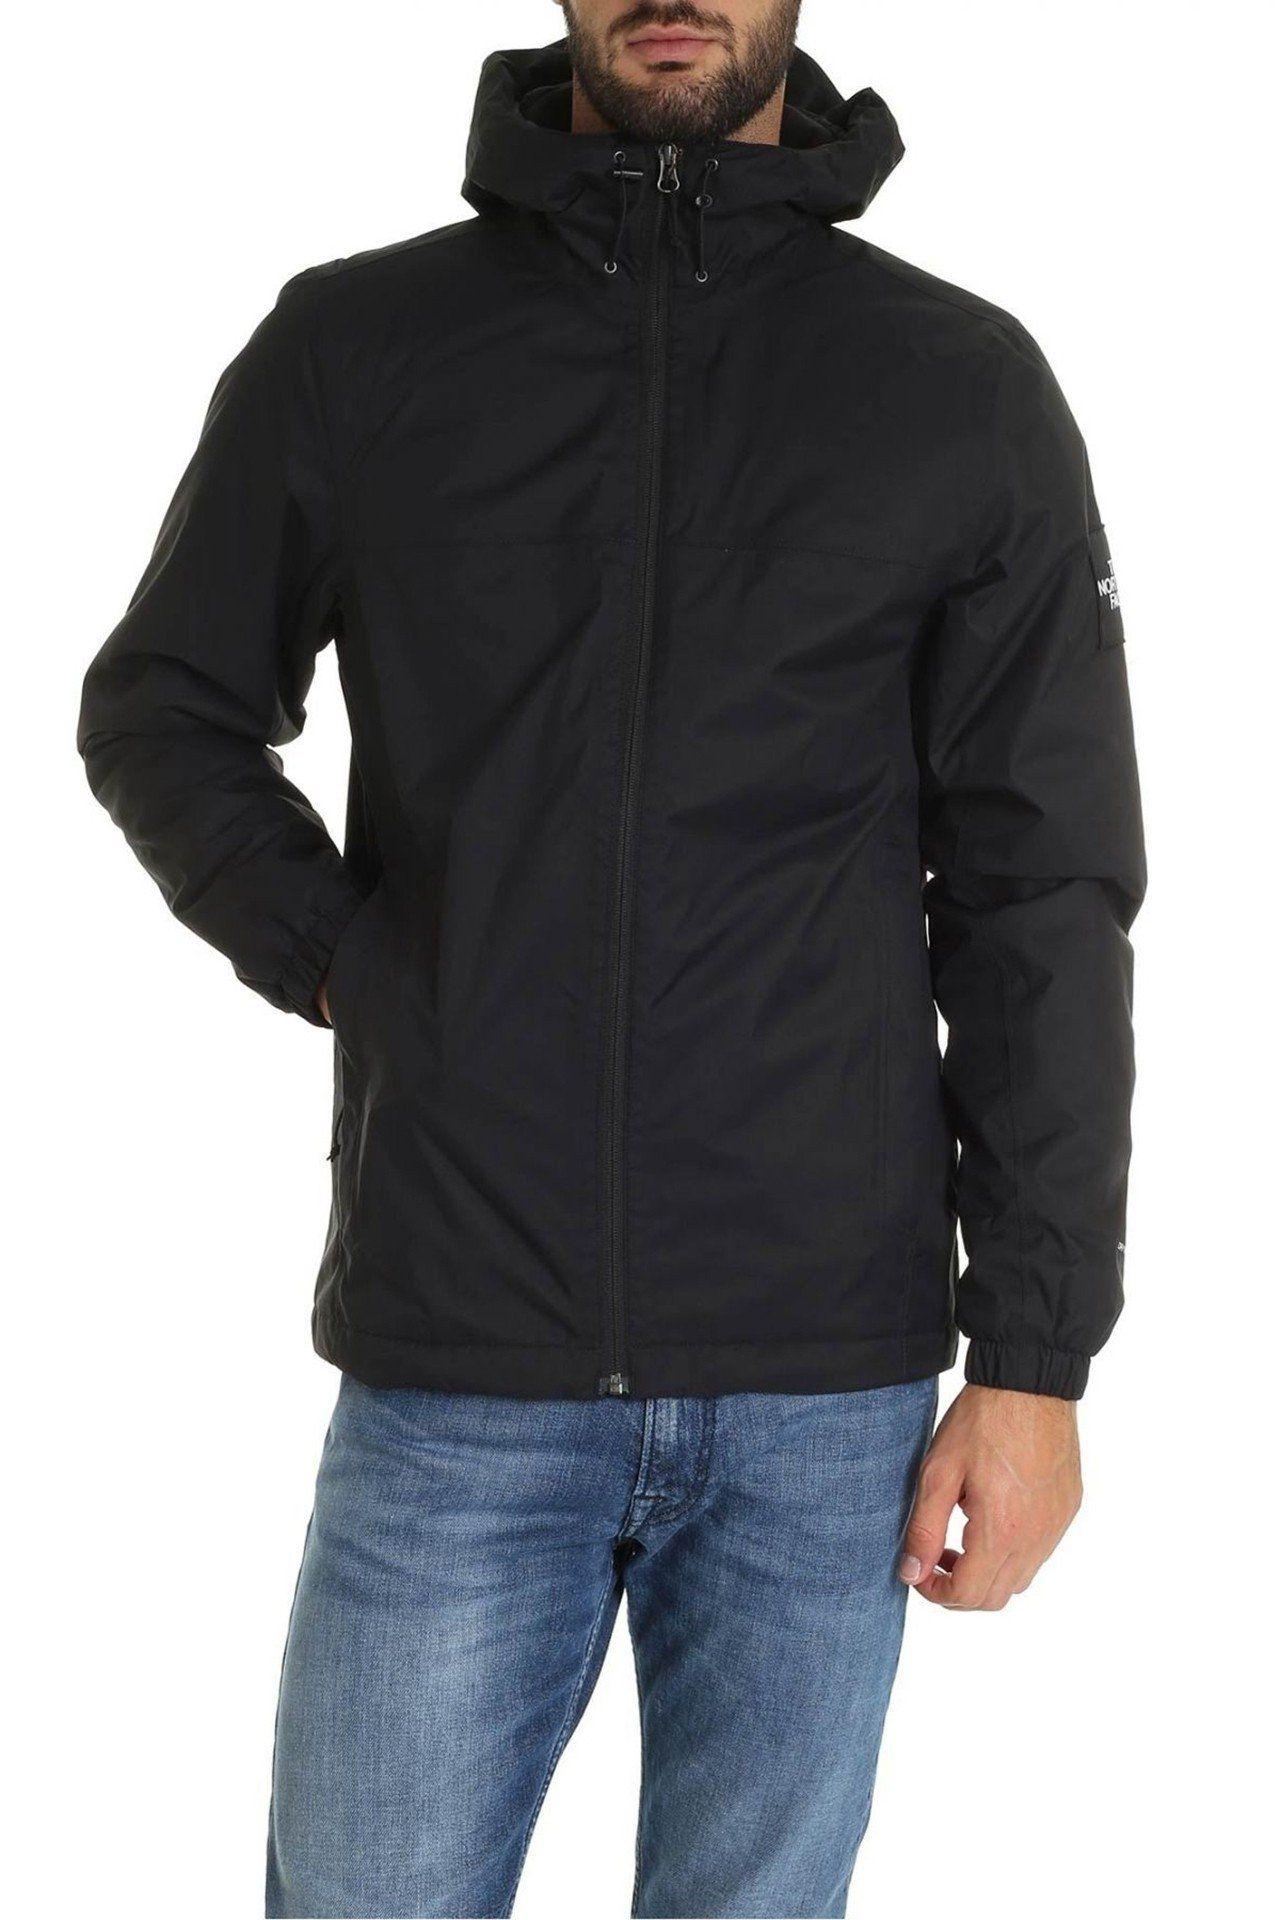 The North Face Synthetic Polyester Outerwear Jacket in Black for Men - Lyst